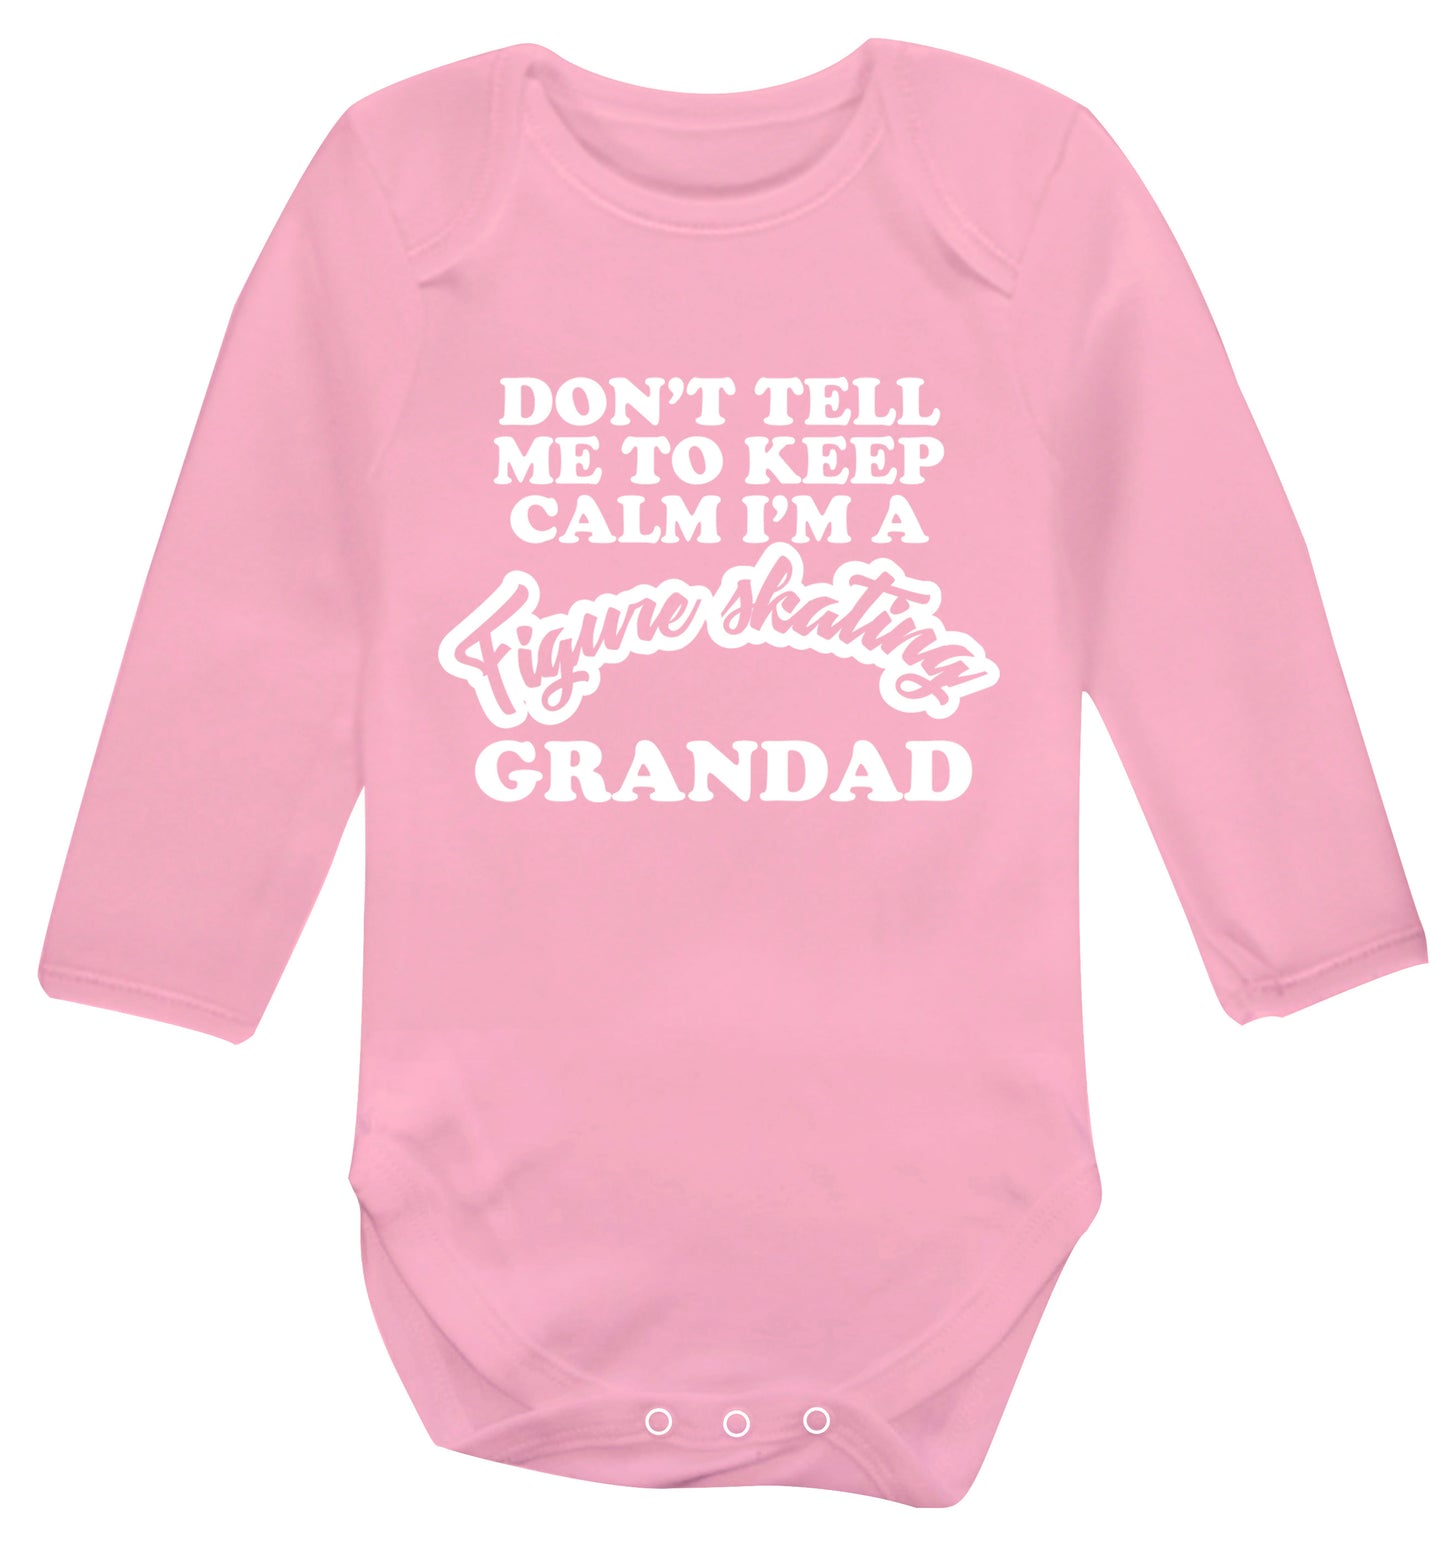 Don't tell me to keep calm I'm a figure skating grandad Baby Vest long sleeved pale pink 6-12 months